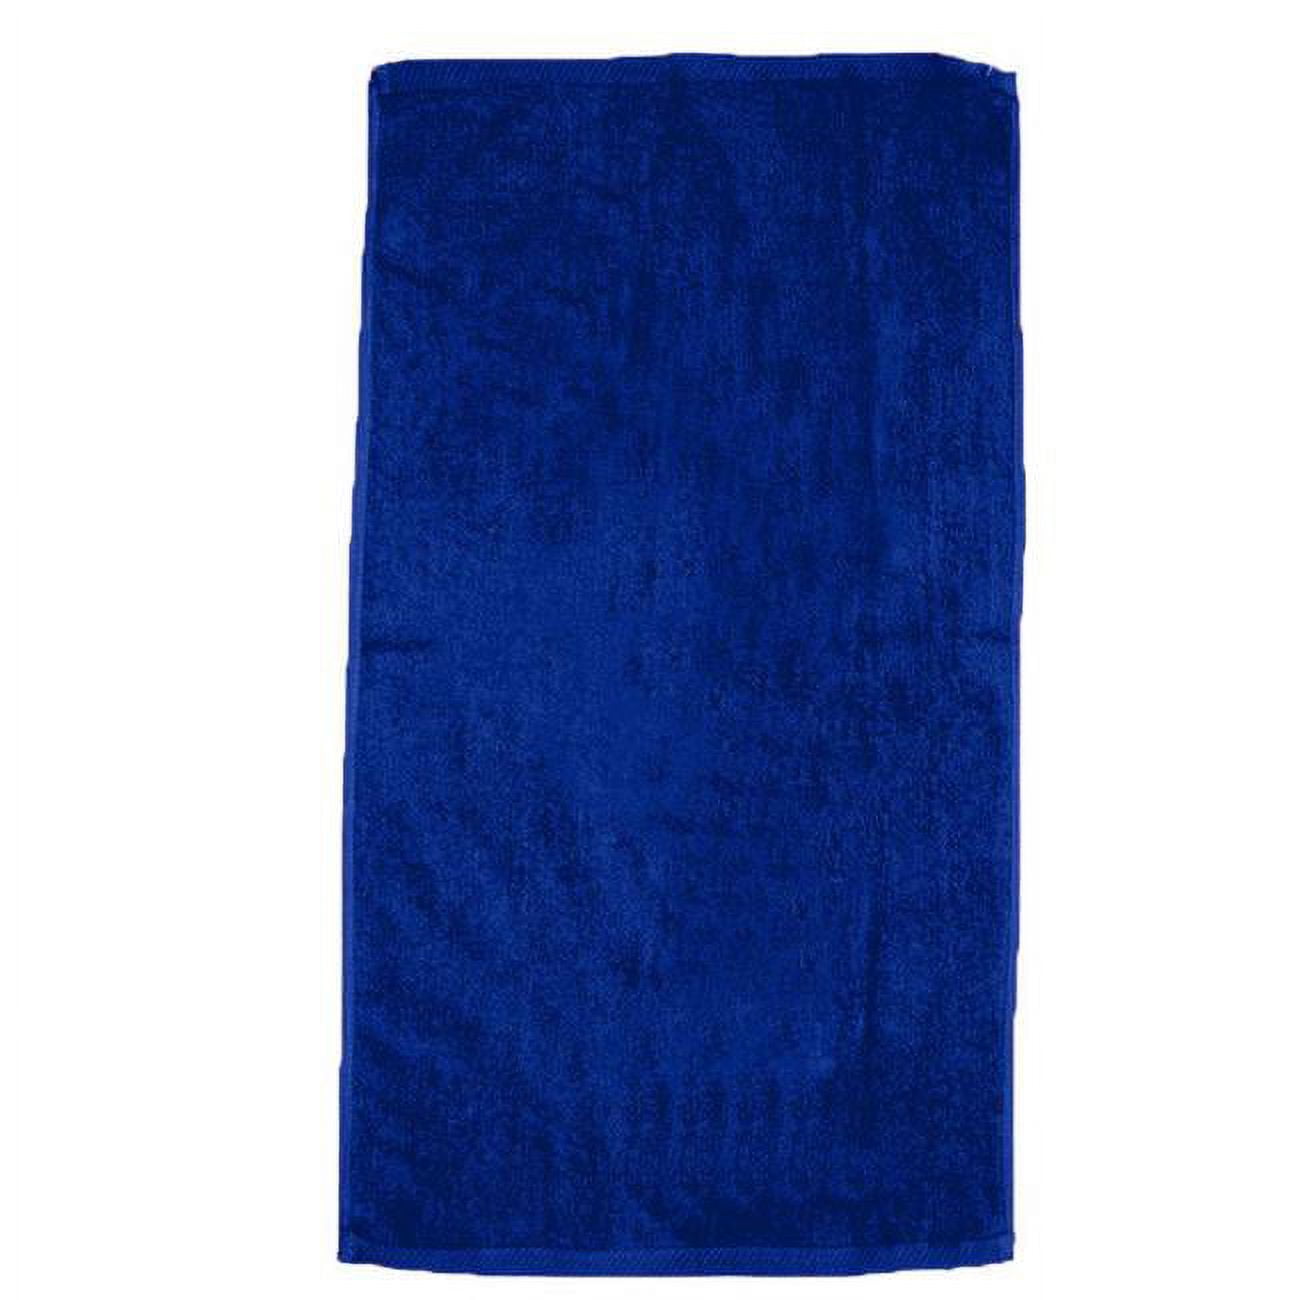 2327076 30 X 60 In. Beach Towels, Navy Blue - Case Of 12